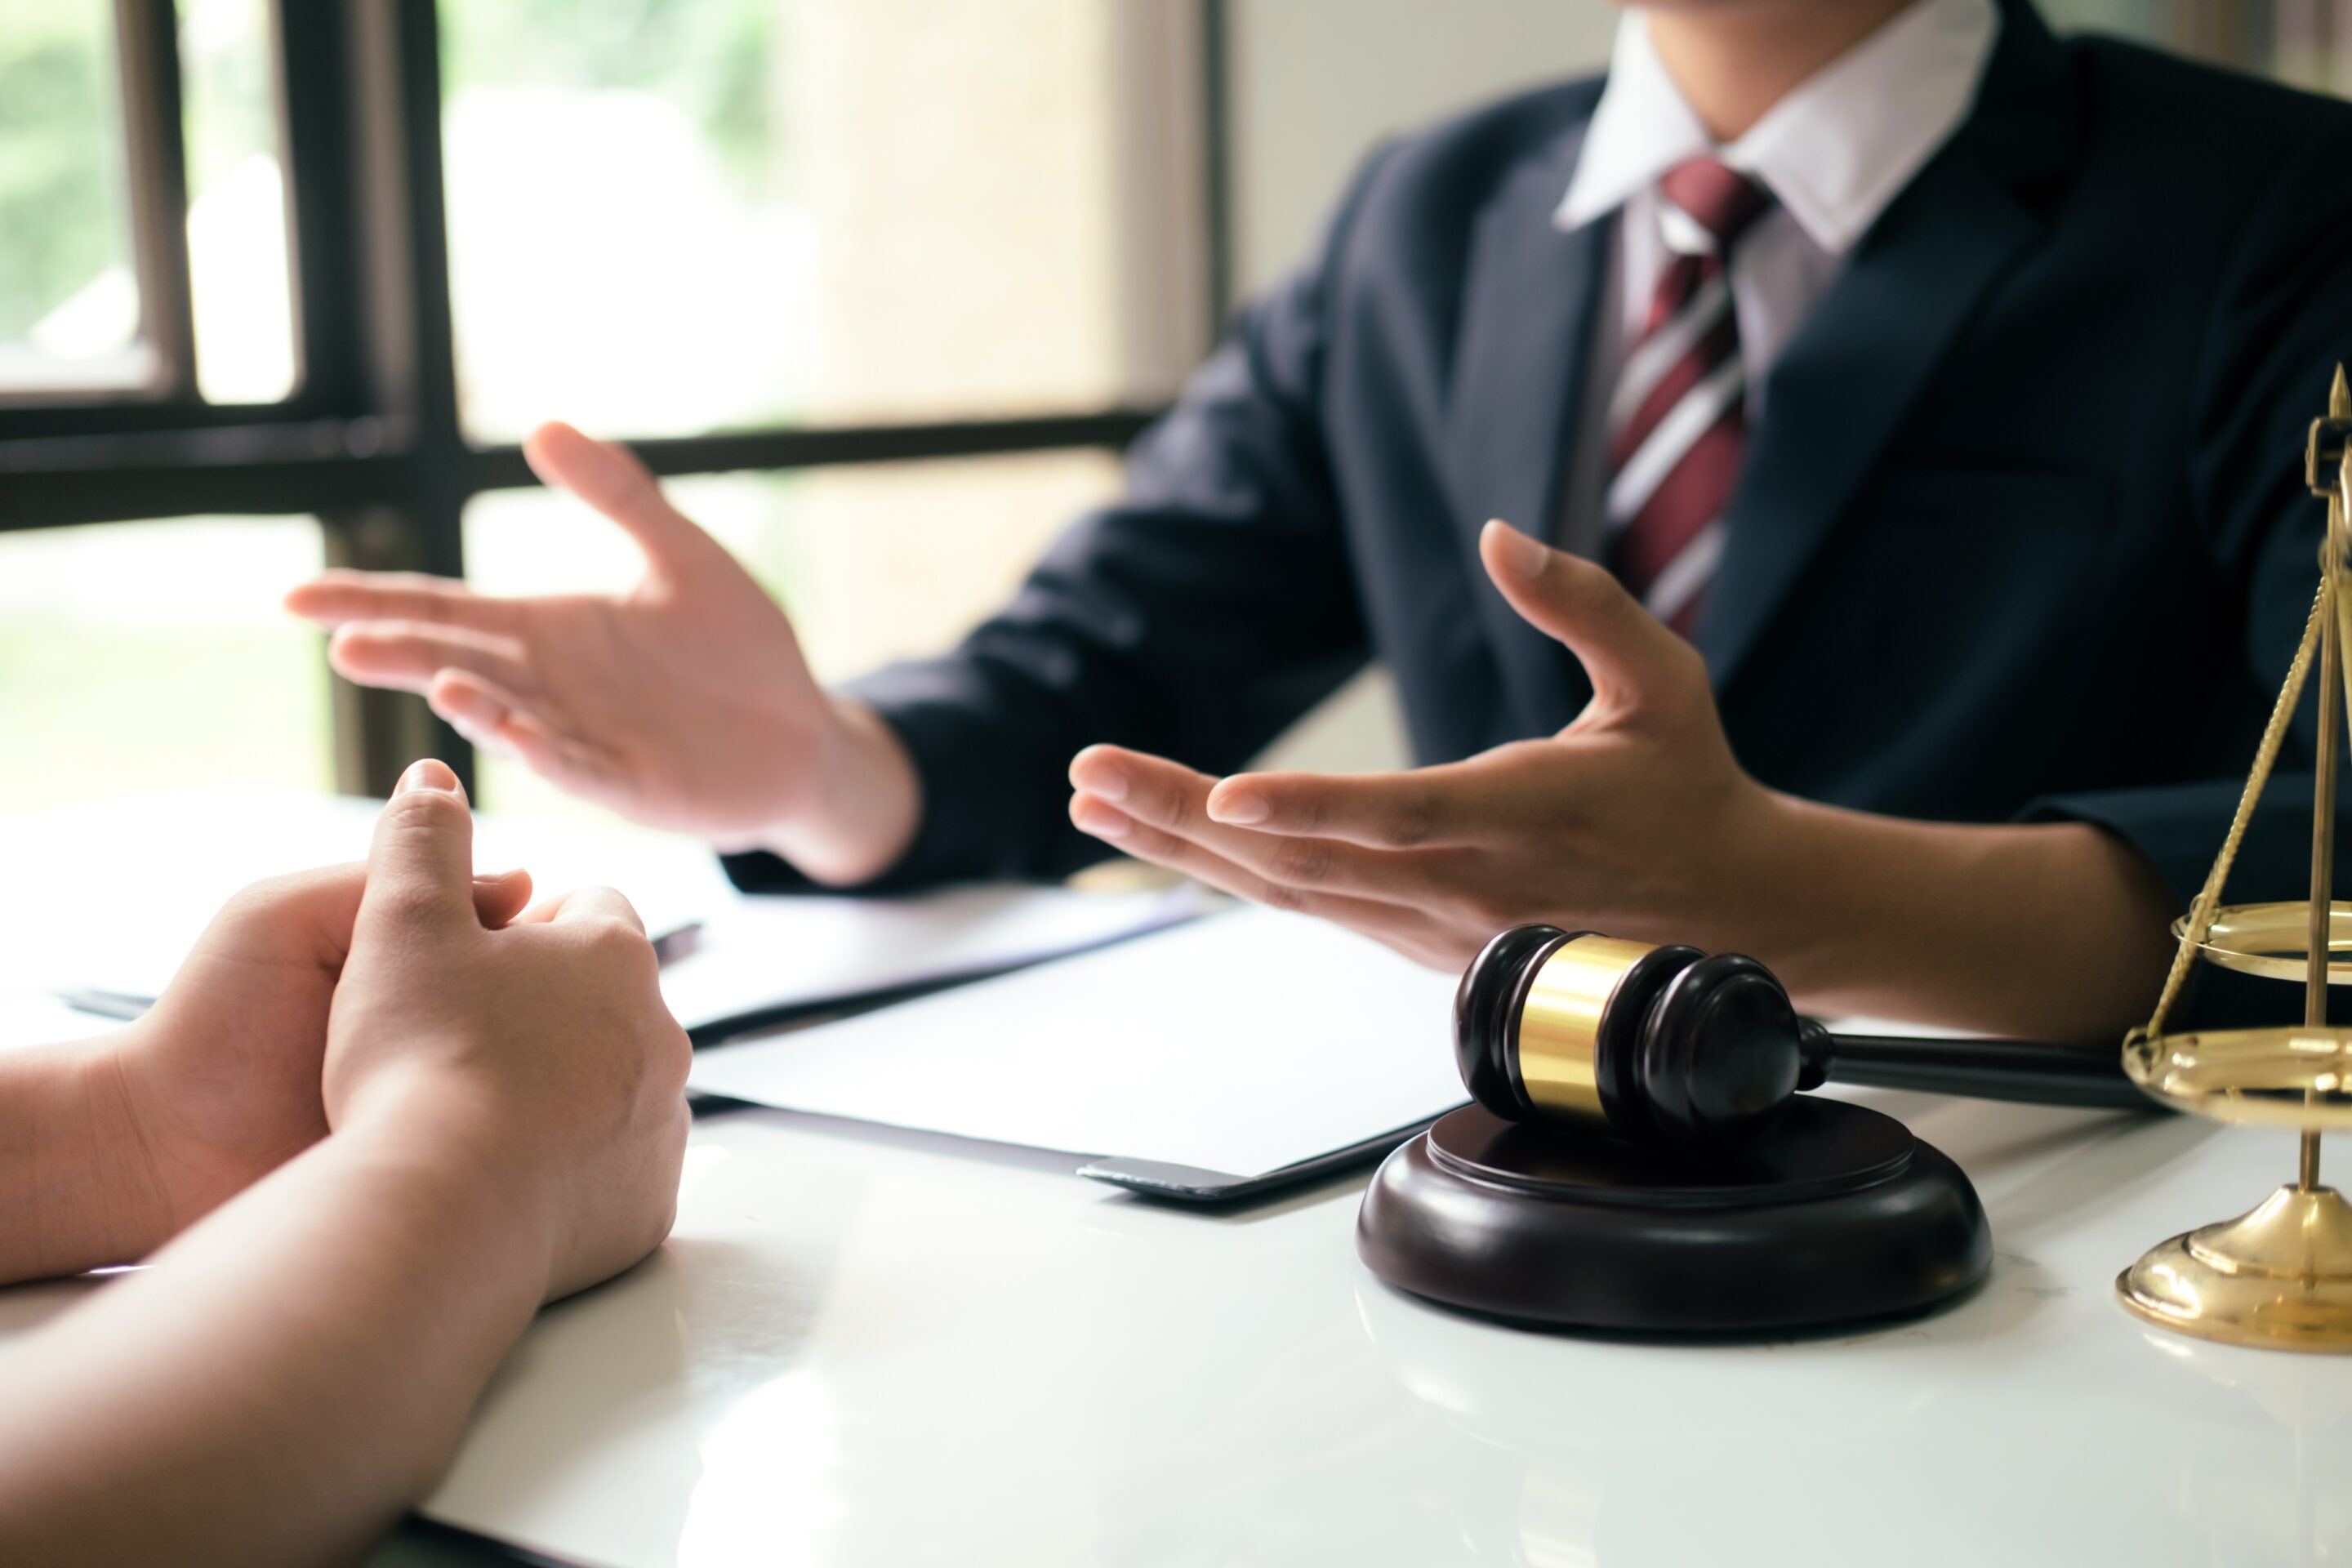 Why Do I Need an Attorney?